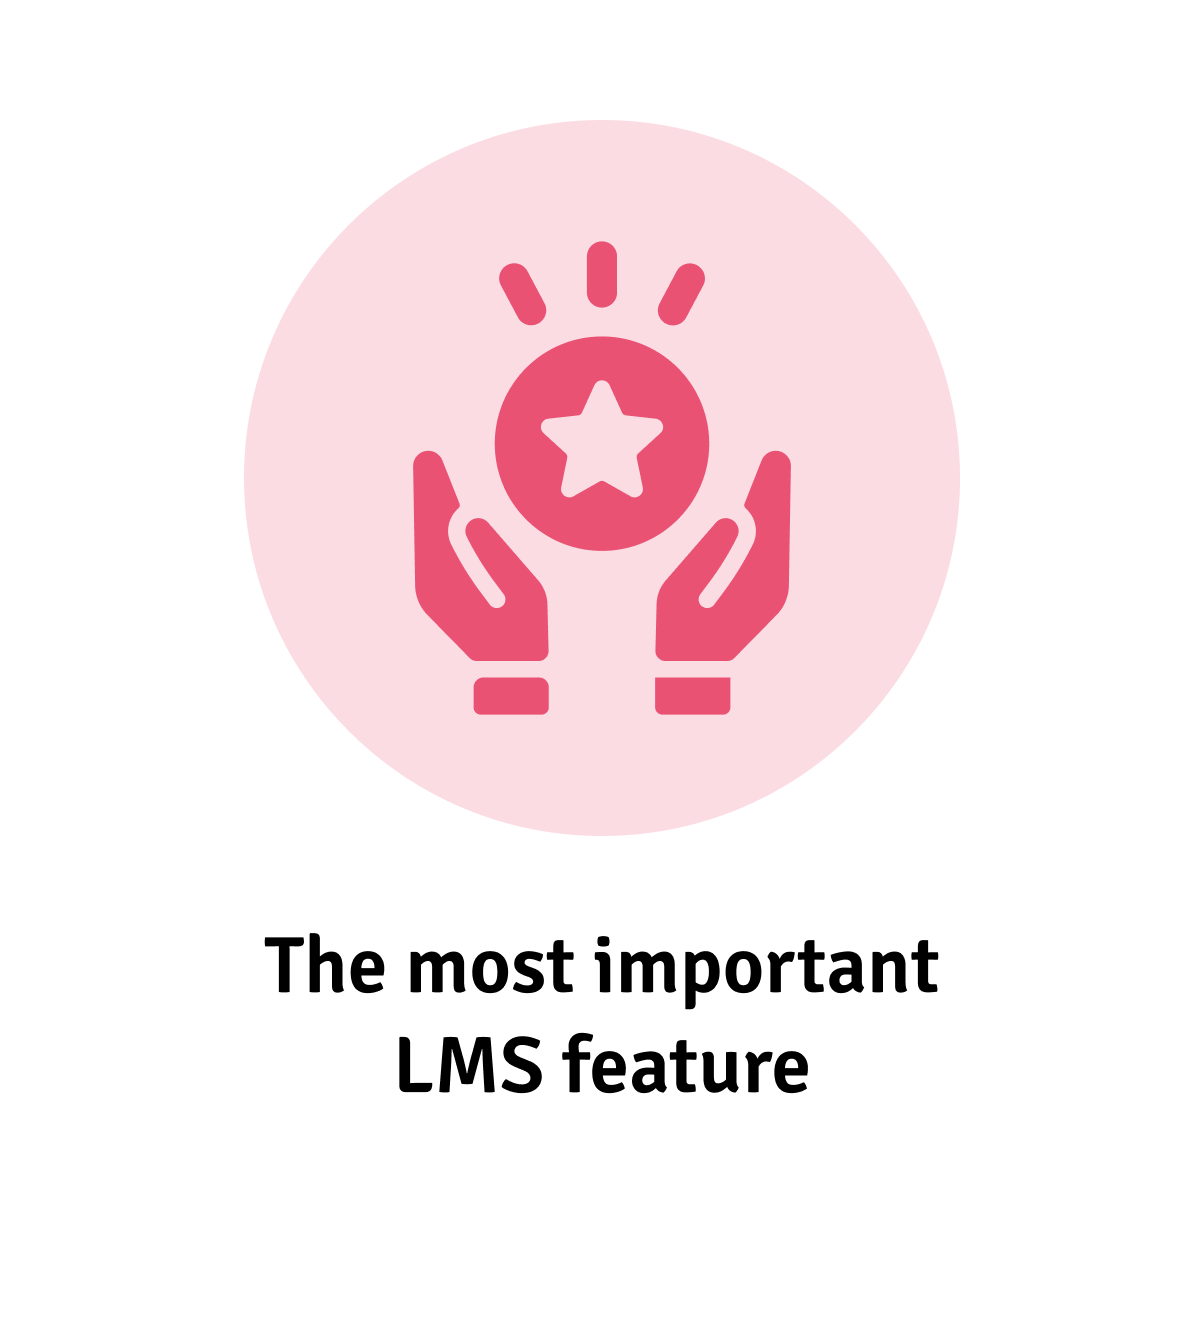 Top 5 LMS features